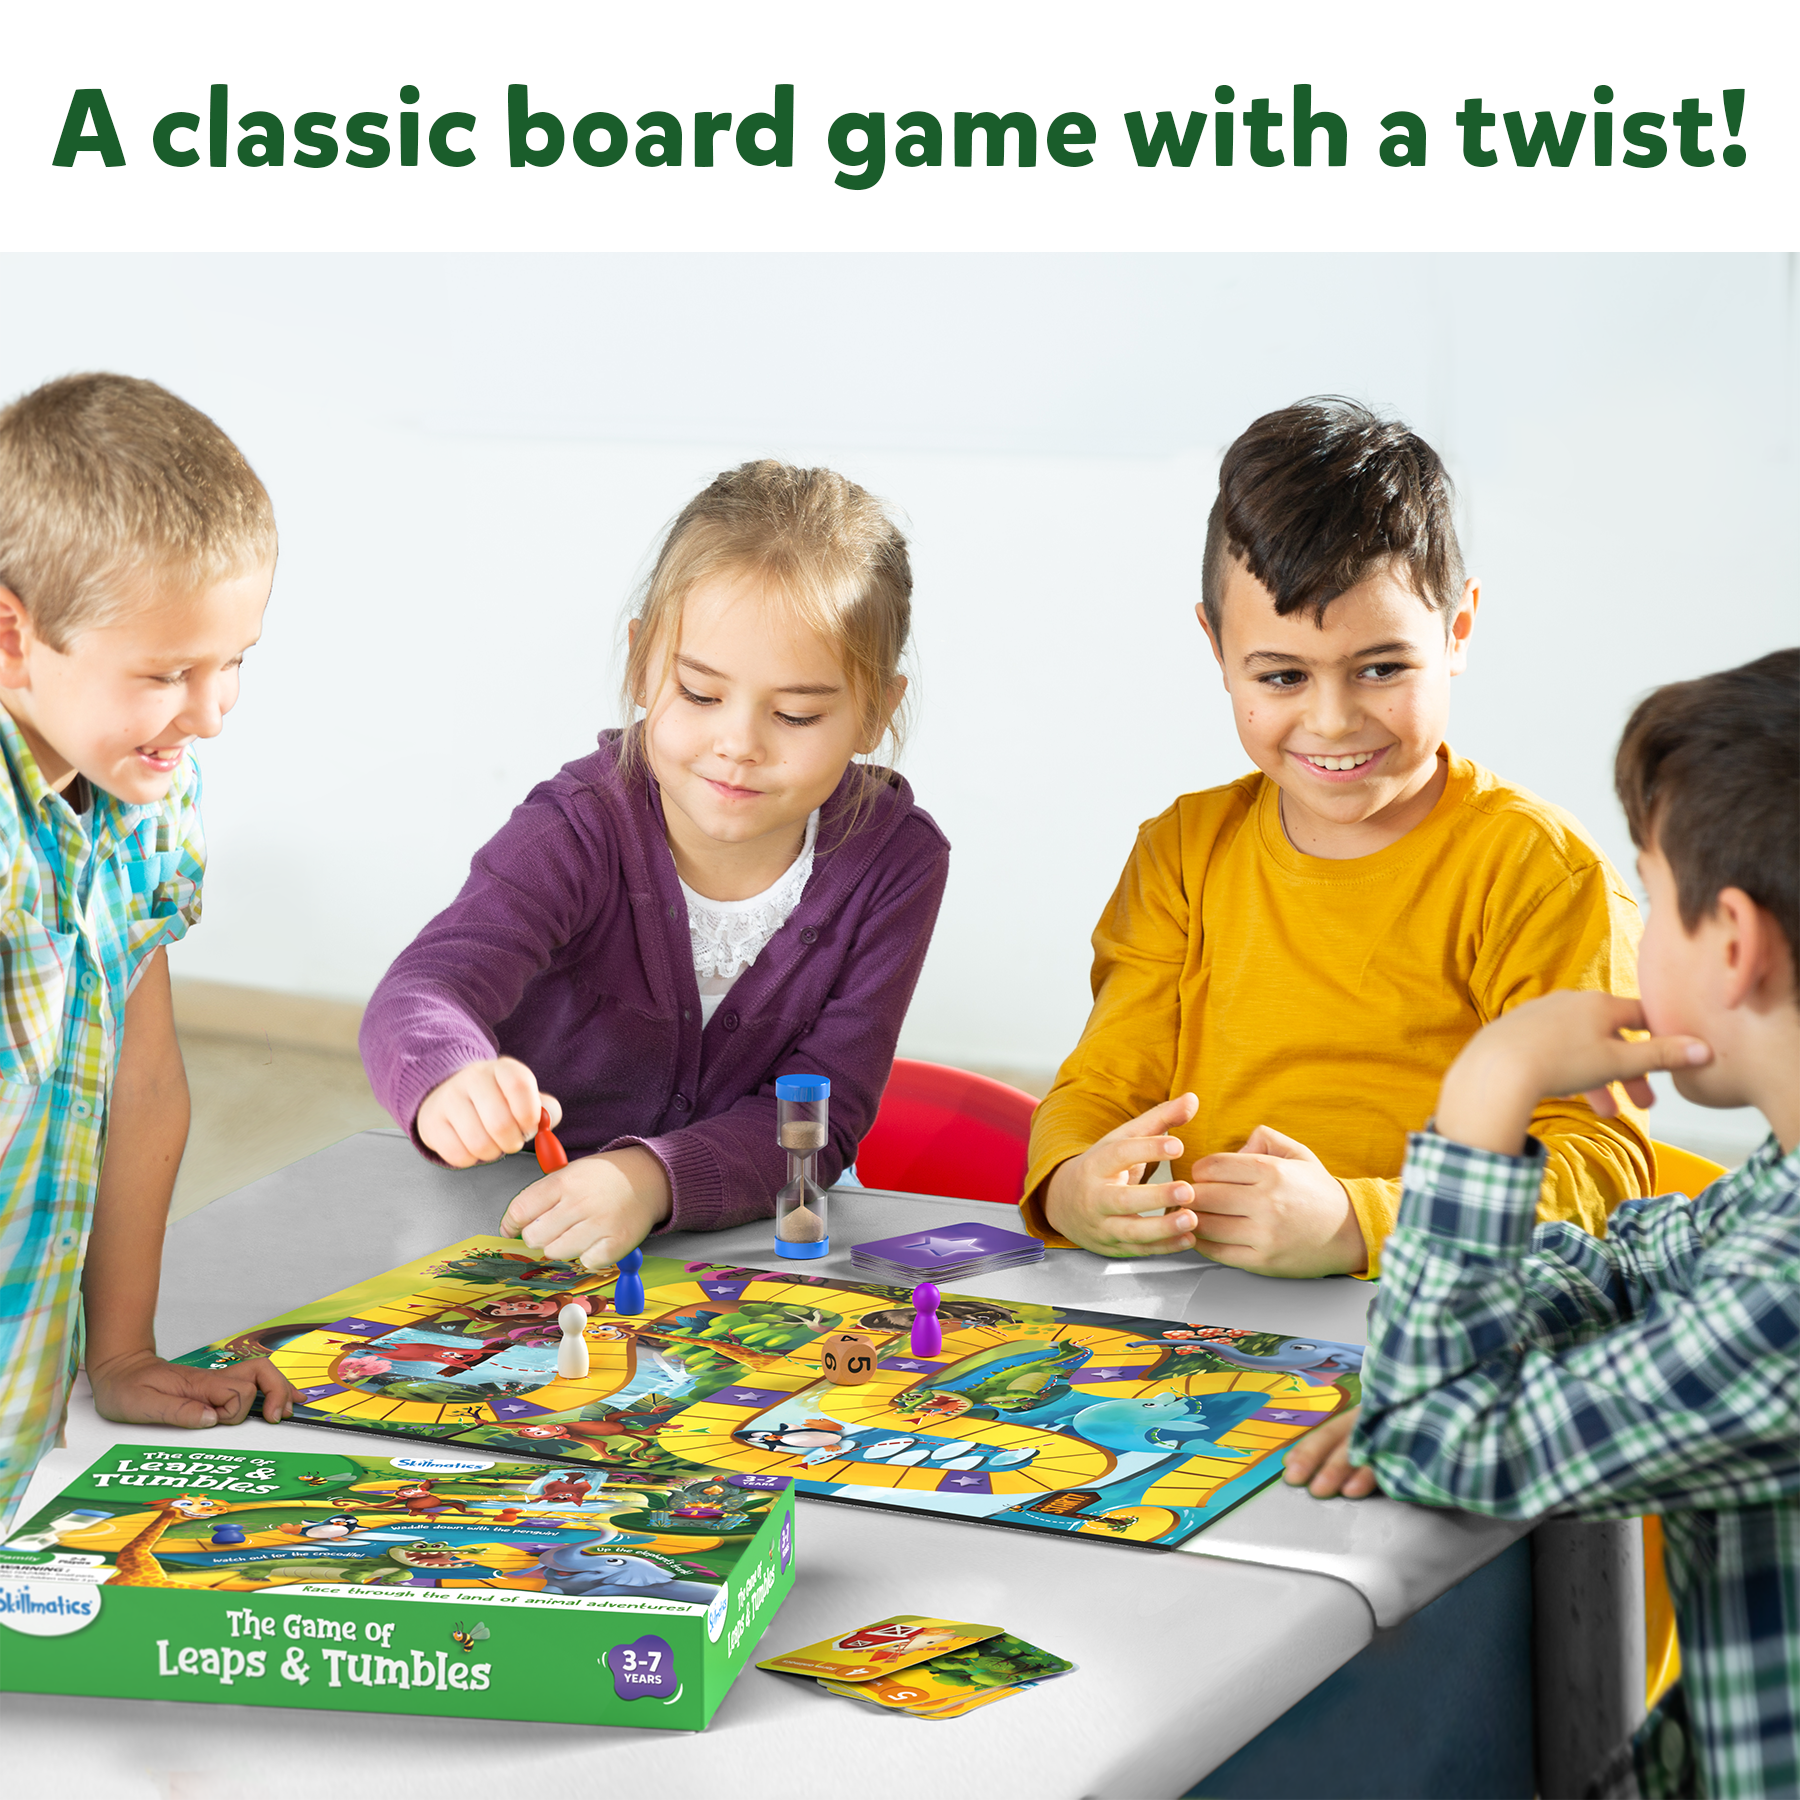 Skillmatics Board Game - Leaps & Tumbles, Race Through The Land of Animal Adventures, Classic Game with a Twist for Ages 3 to 7